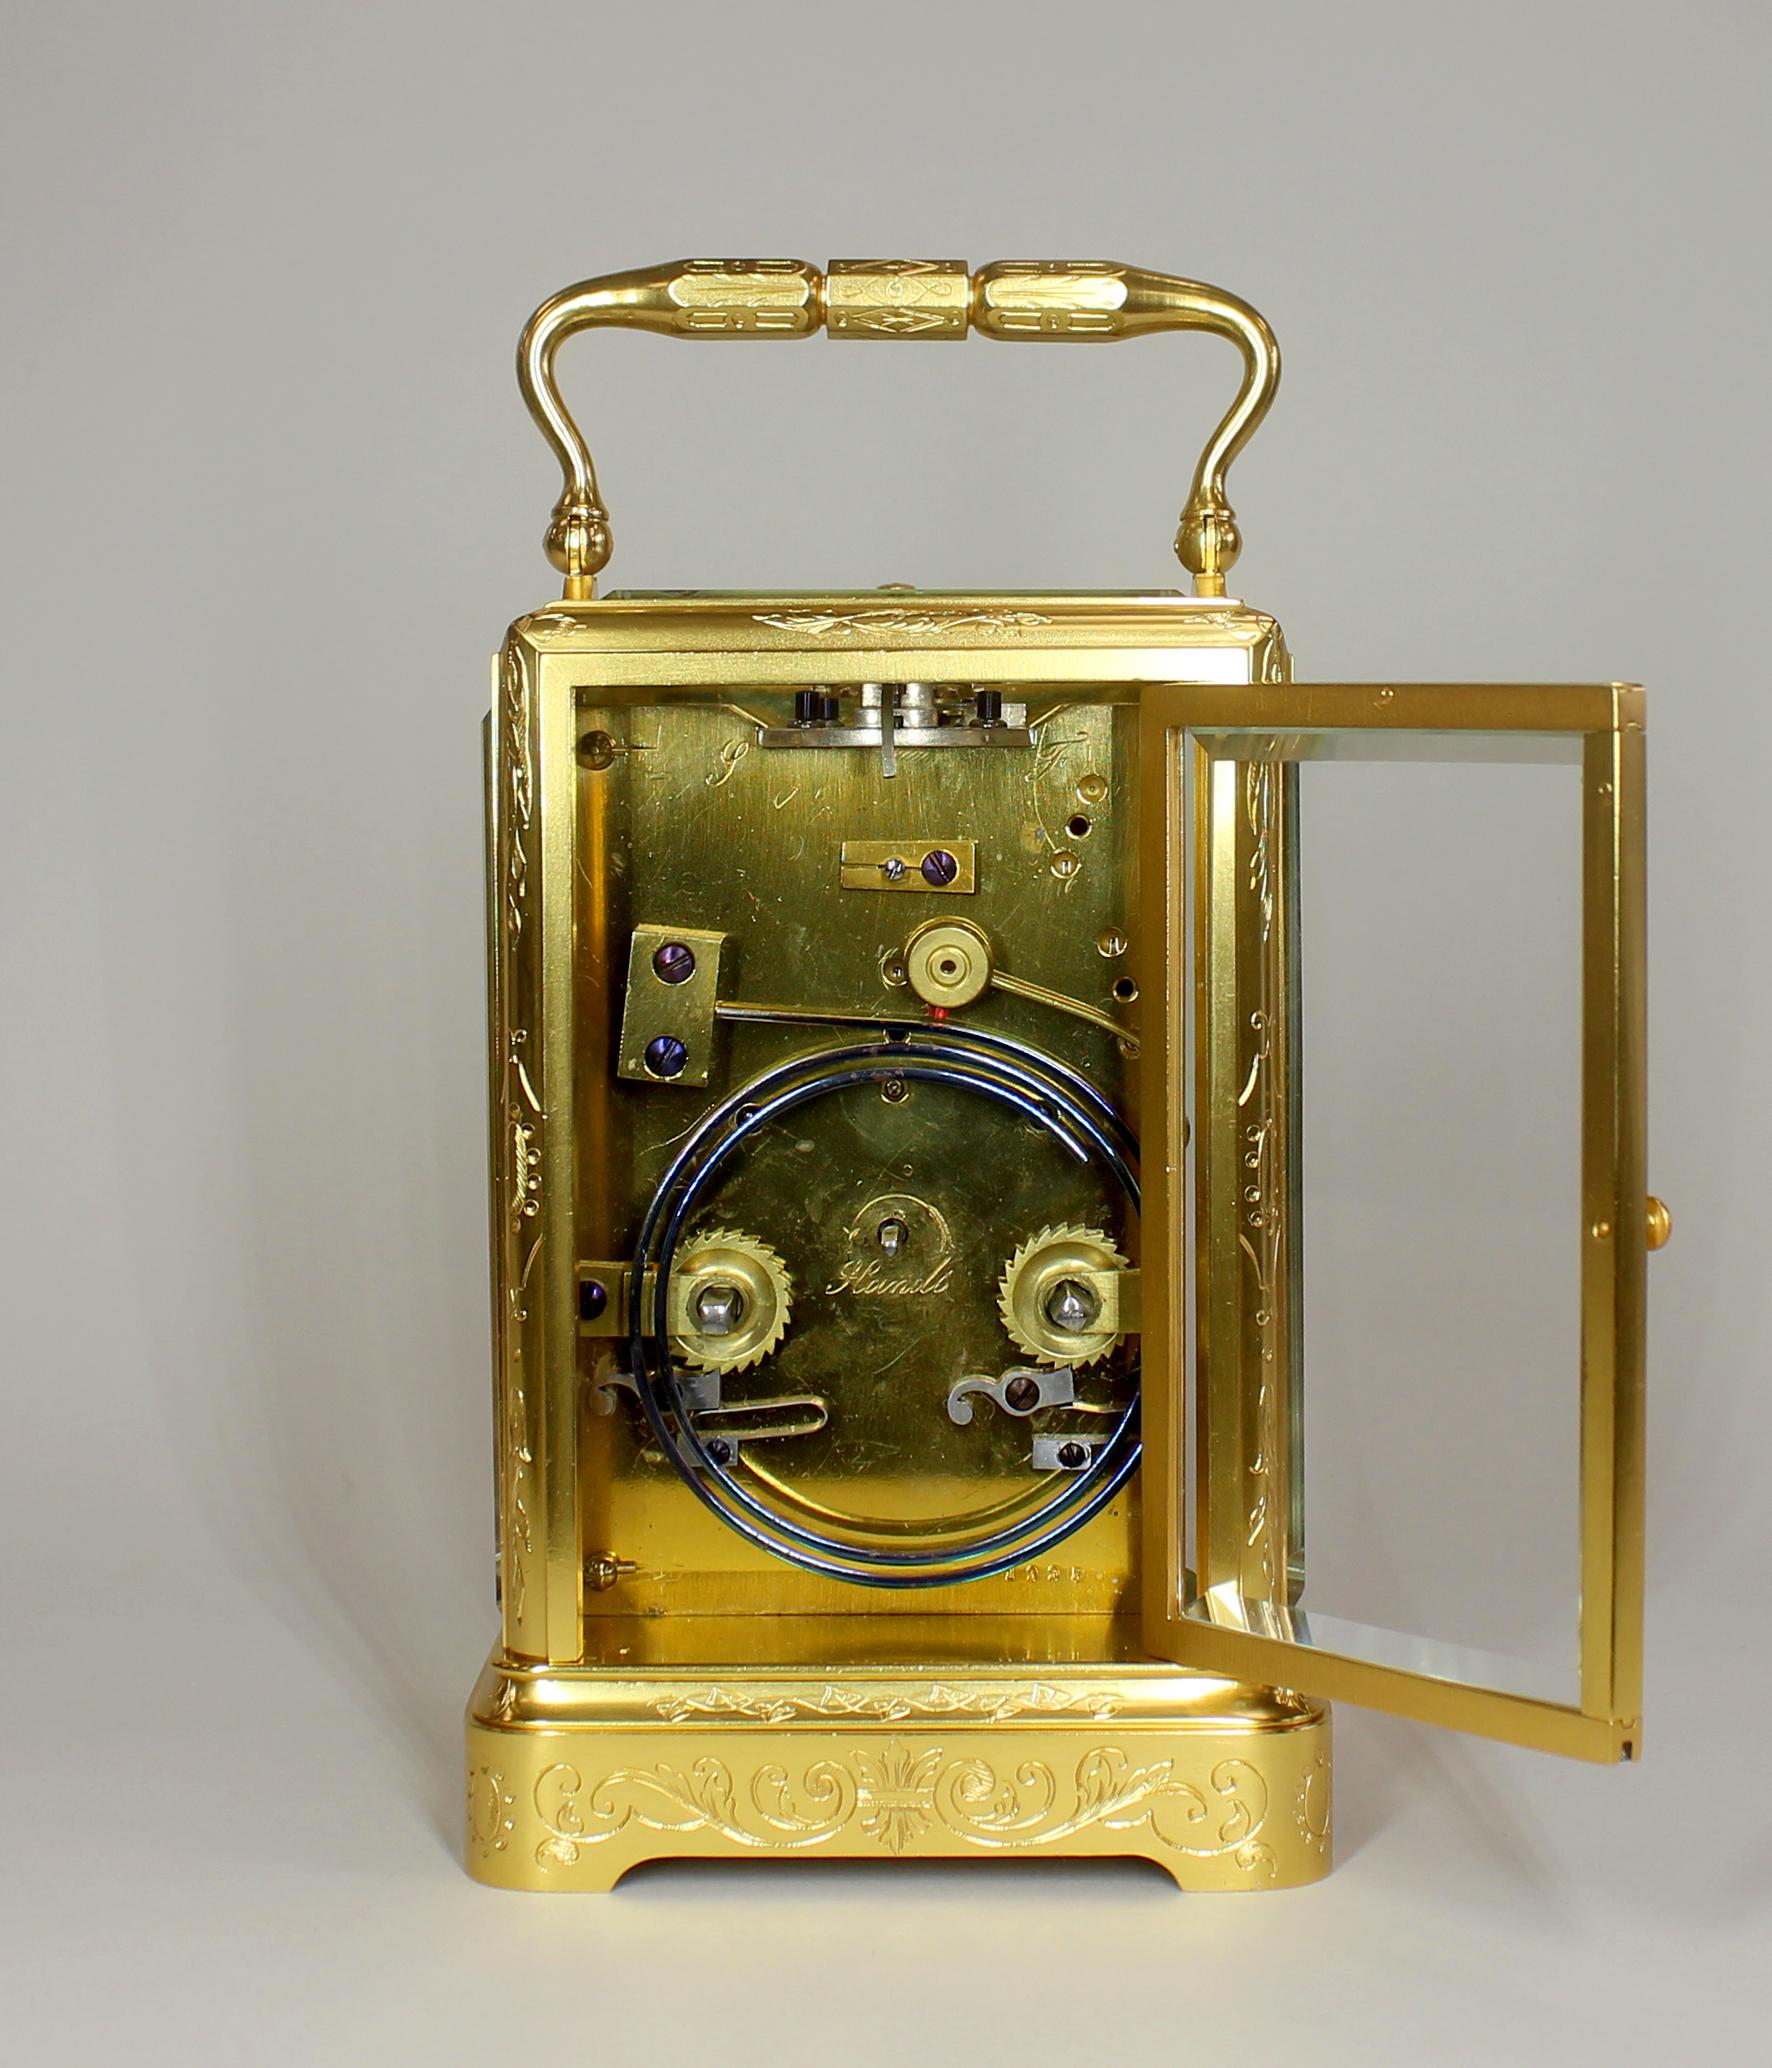 One Piece Engraved Repeating Carriage Clock In Good Condition For Sale In Amersham, GB